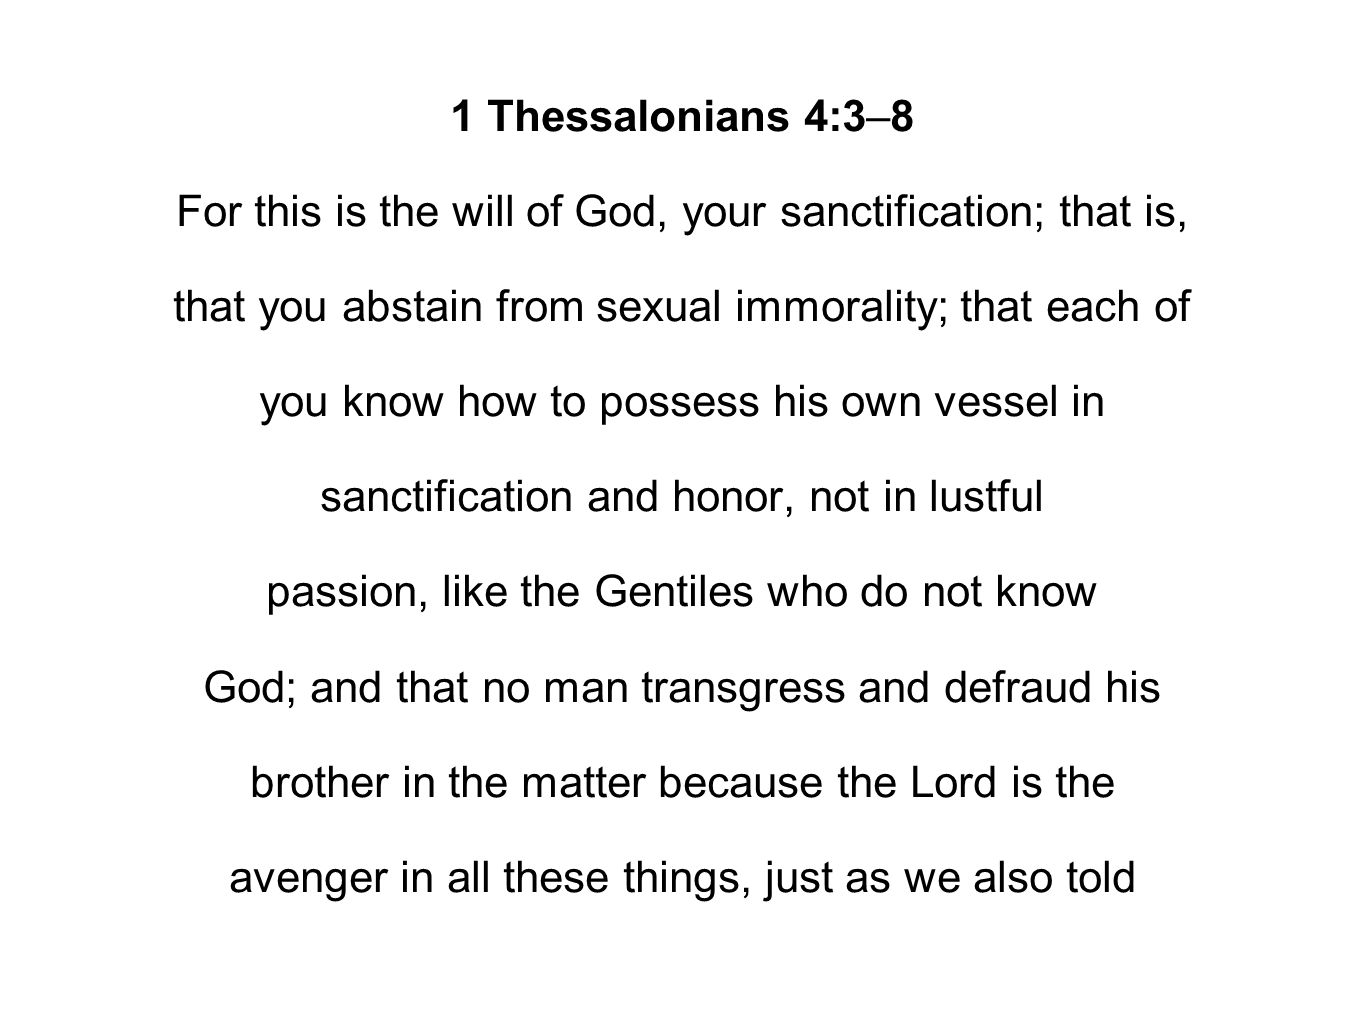 1 Thessalonians 4:3–8 For this is the will of God, your sanctification; that is, that you abstain from sexual immorality; that each of you know how to possess his own vessel in sanctification and honor, not in lustful passion, like the Gentiles who do not know God; and that no man transgress and defraud his brother in the matter because the Lord is the avenger in all these things, just as we also told